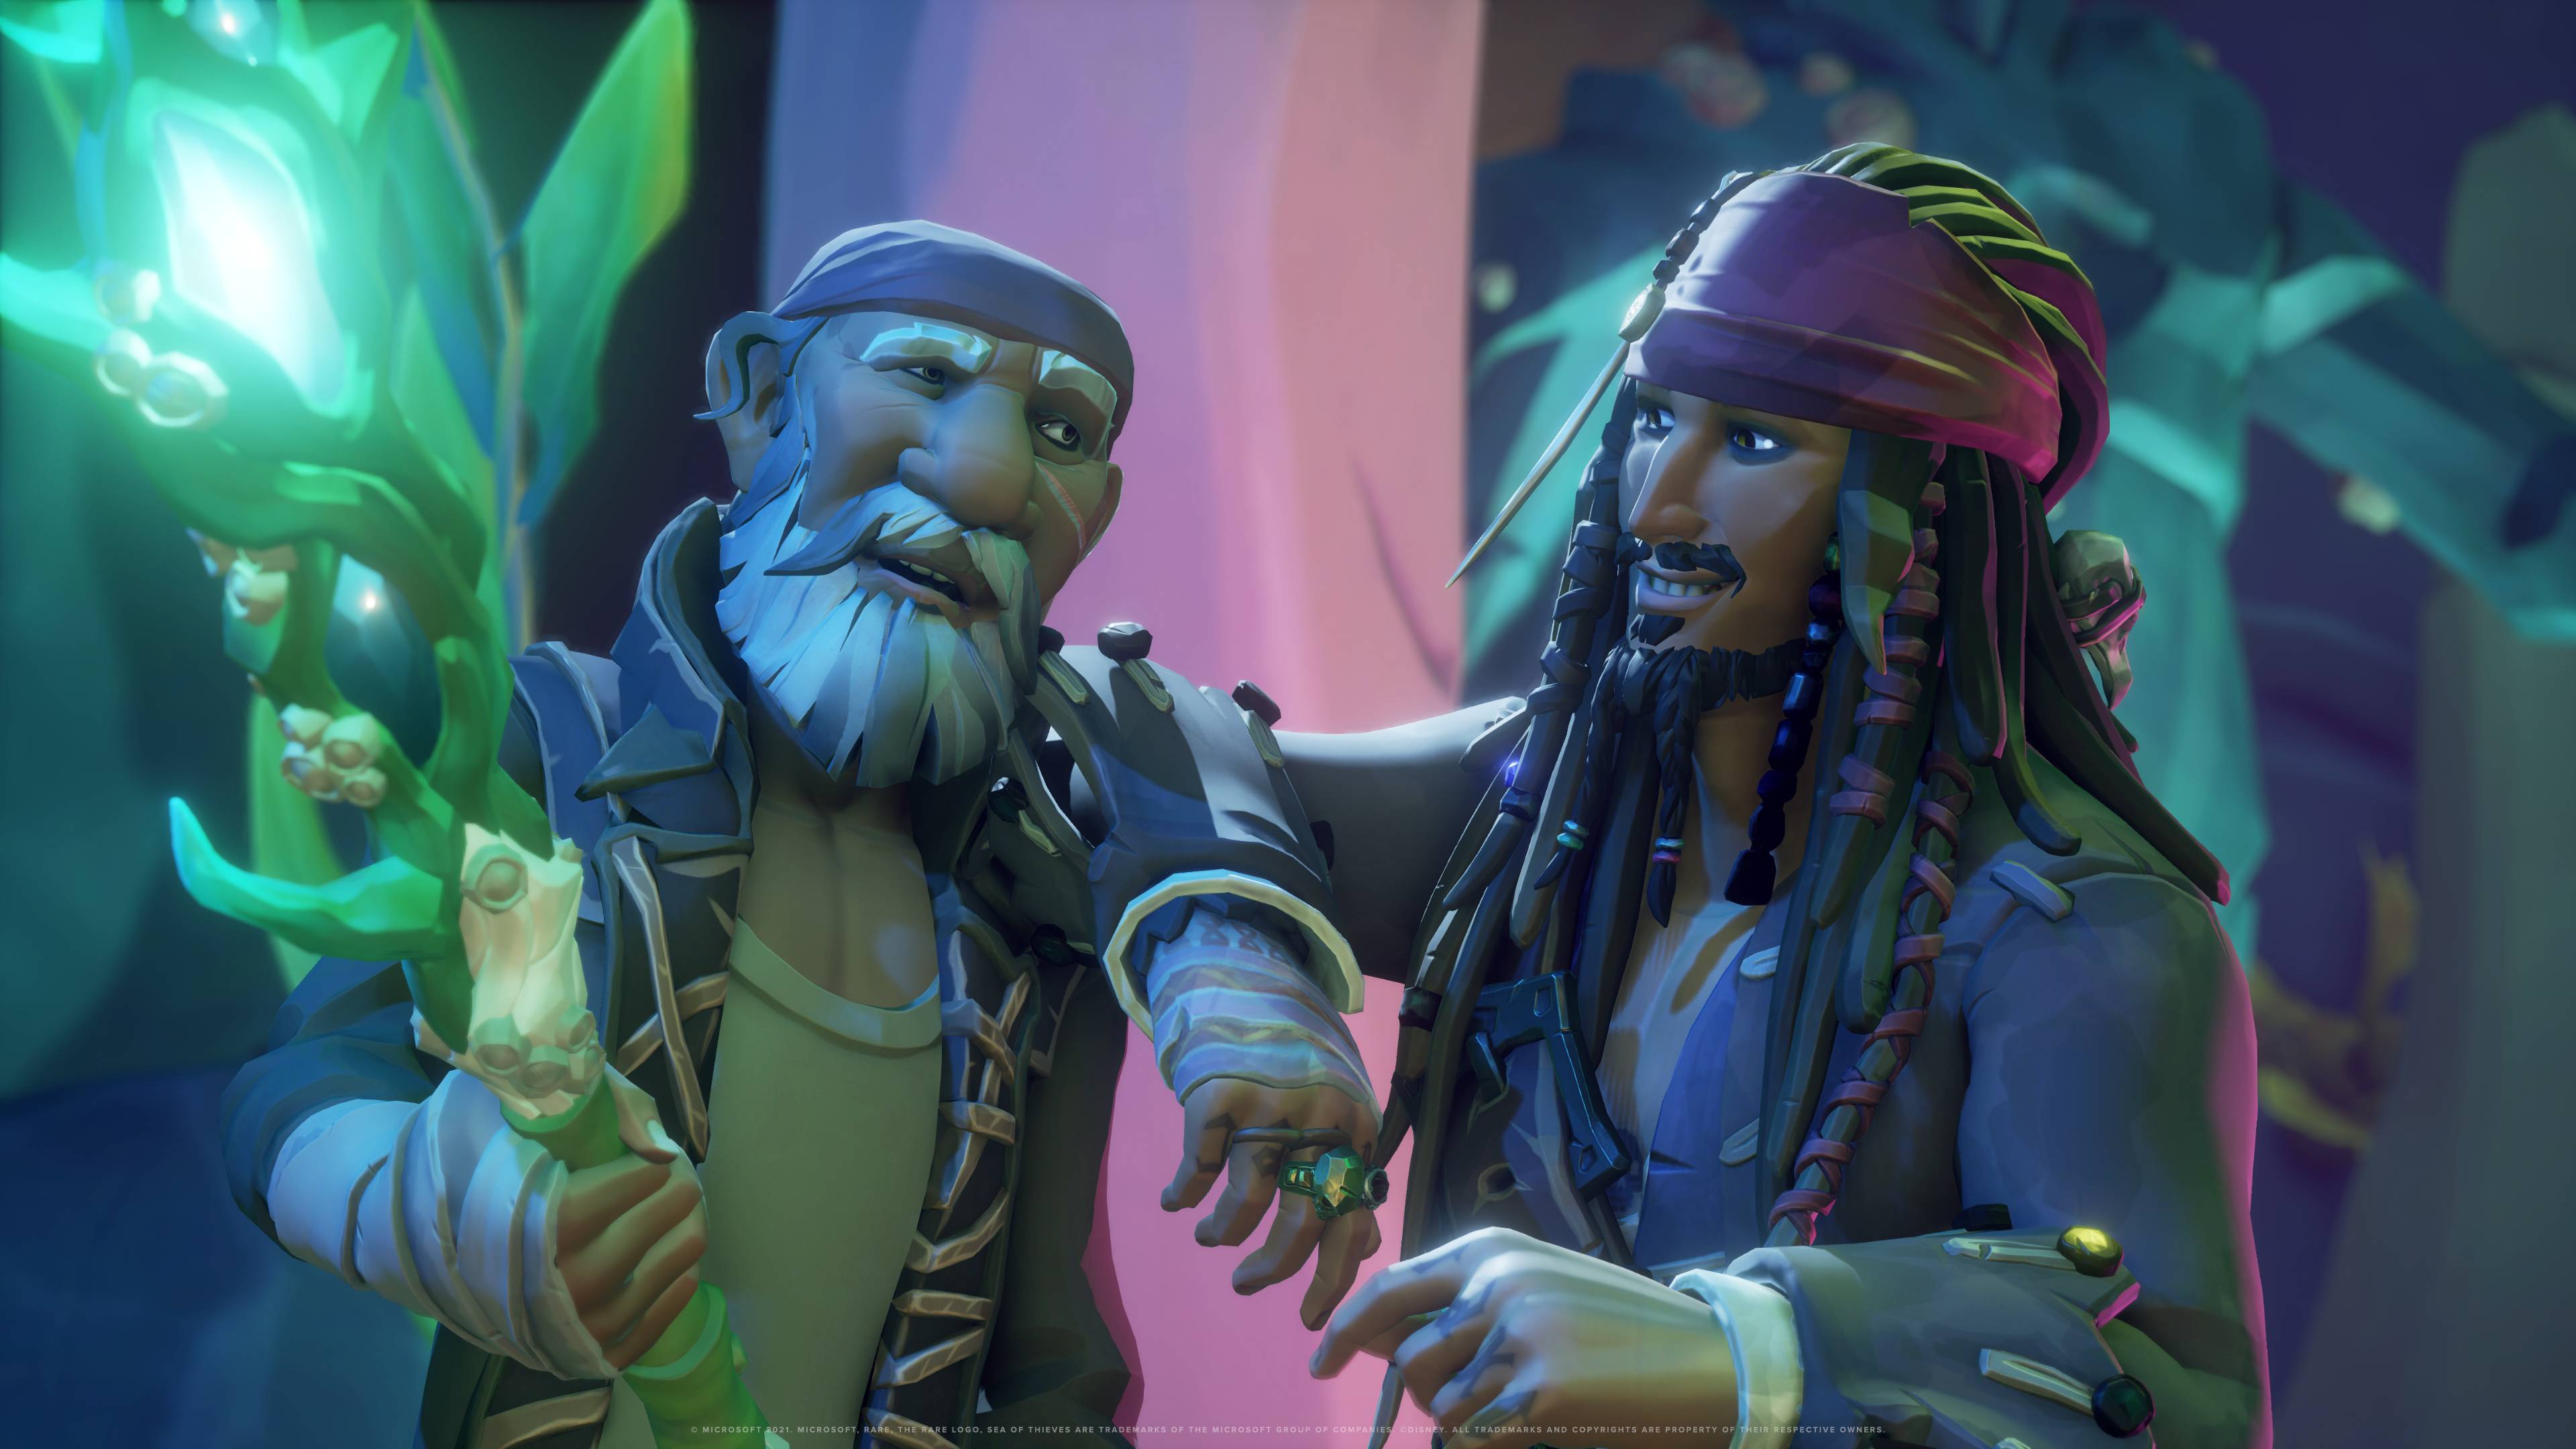 Sea of Thieves Season 3, A Pirate's Life and updates | TechRadar